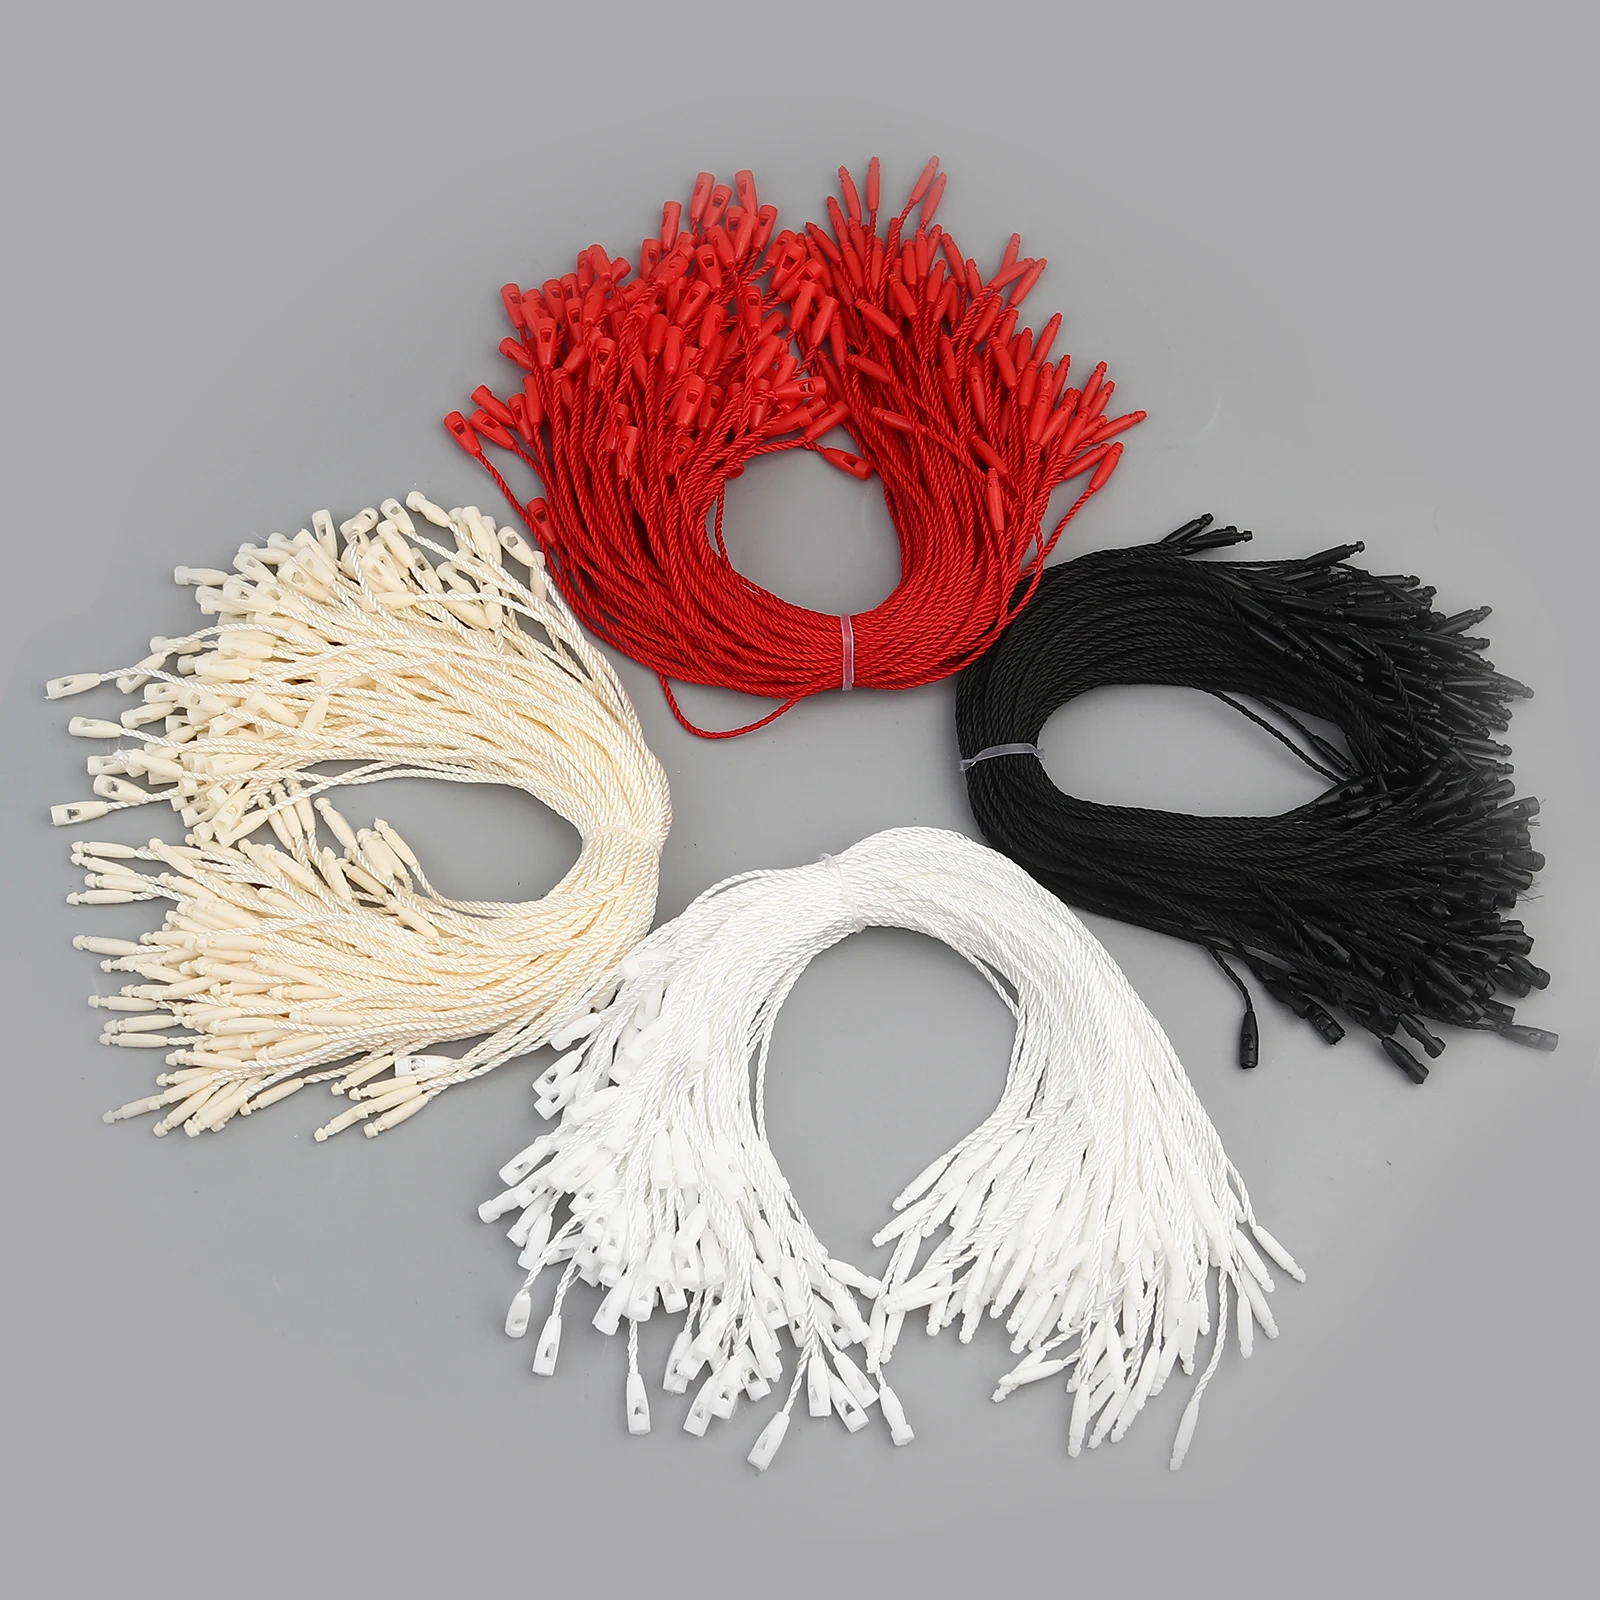 

200pcs Clothes Tag Clothing Wire Rope Cotton/Wax/ Polyester Hang Label With Plastic String Snap Lock Pin Loop Tie Fasteners Cord